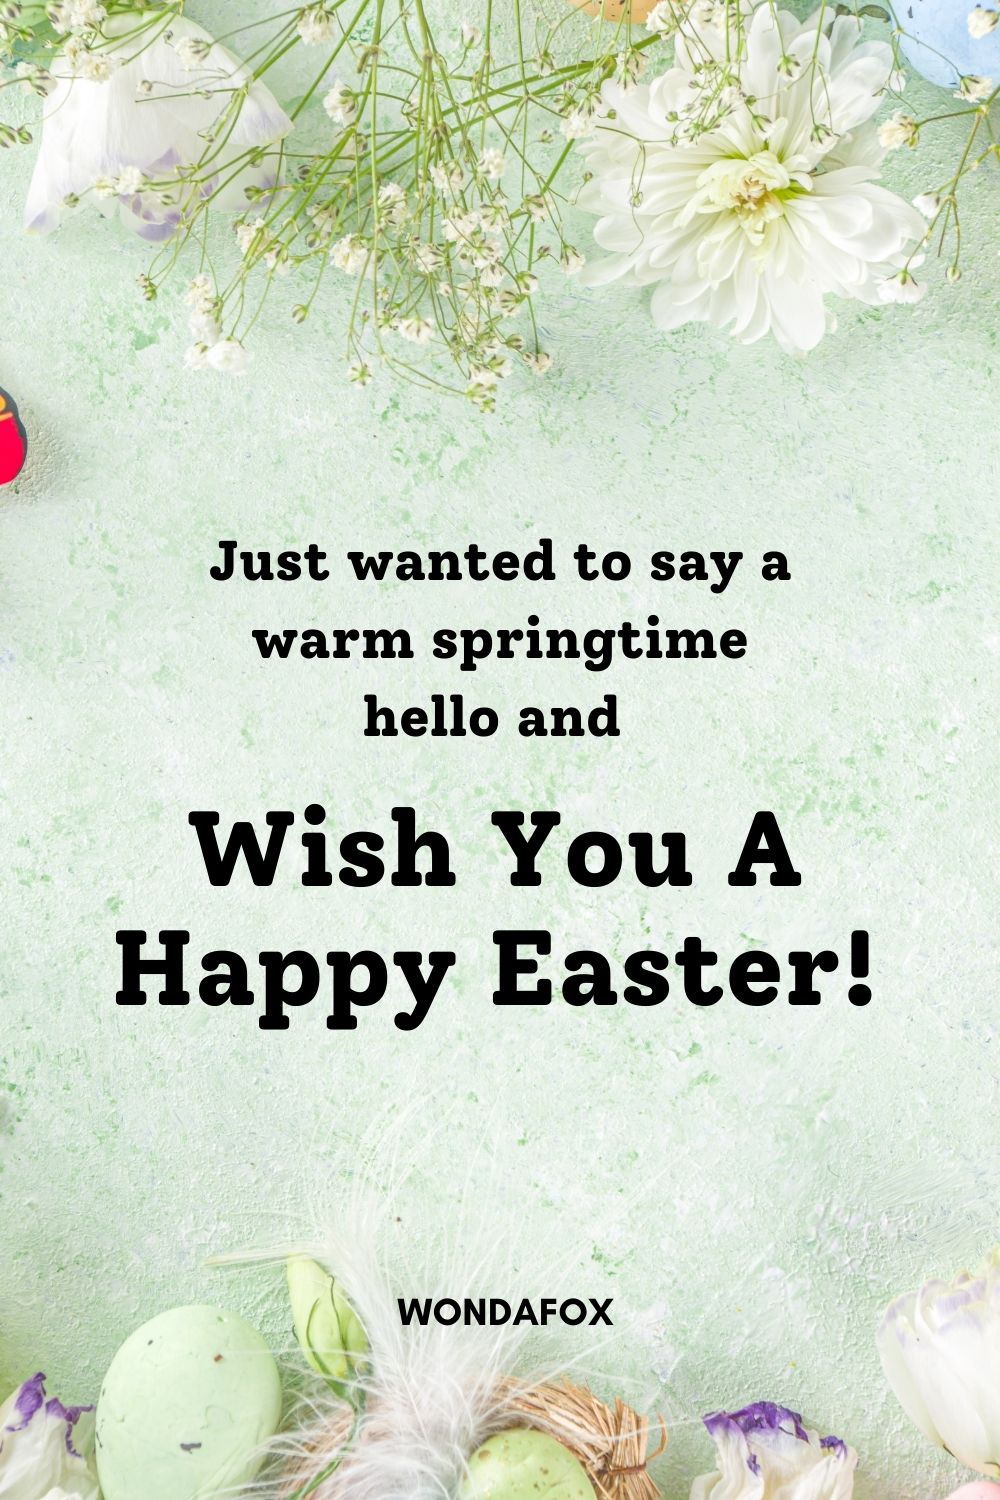 Just wanted to say a warm springtime hello and wish you a happy Easter!